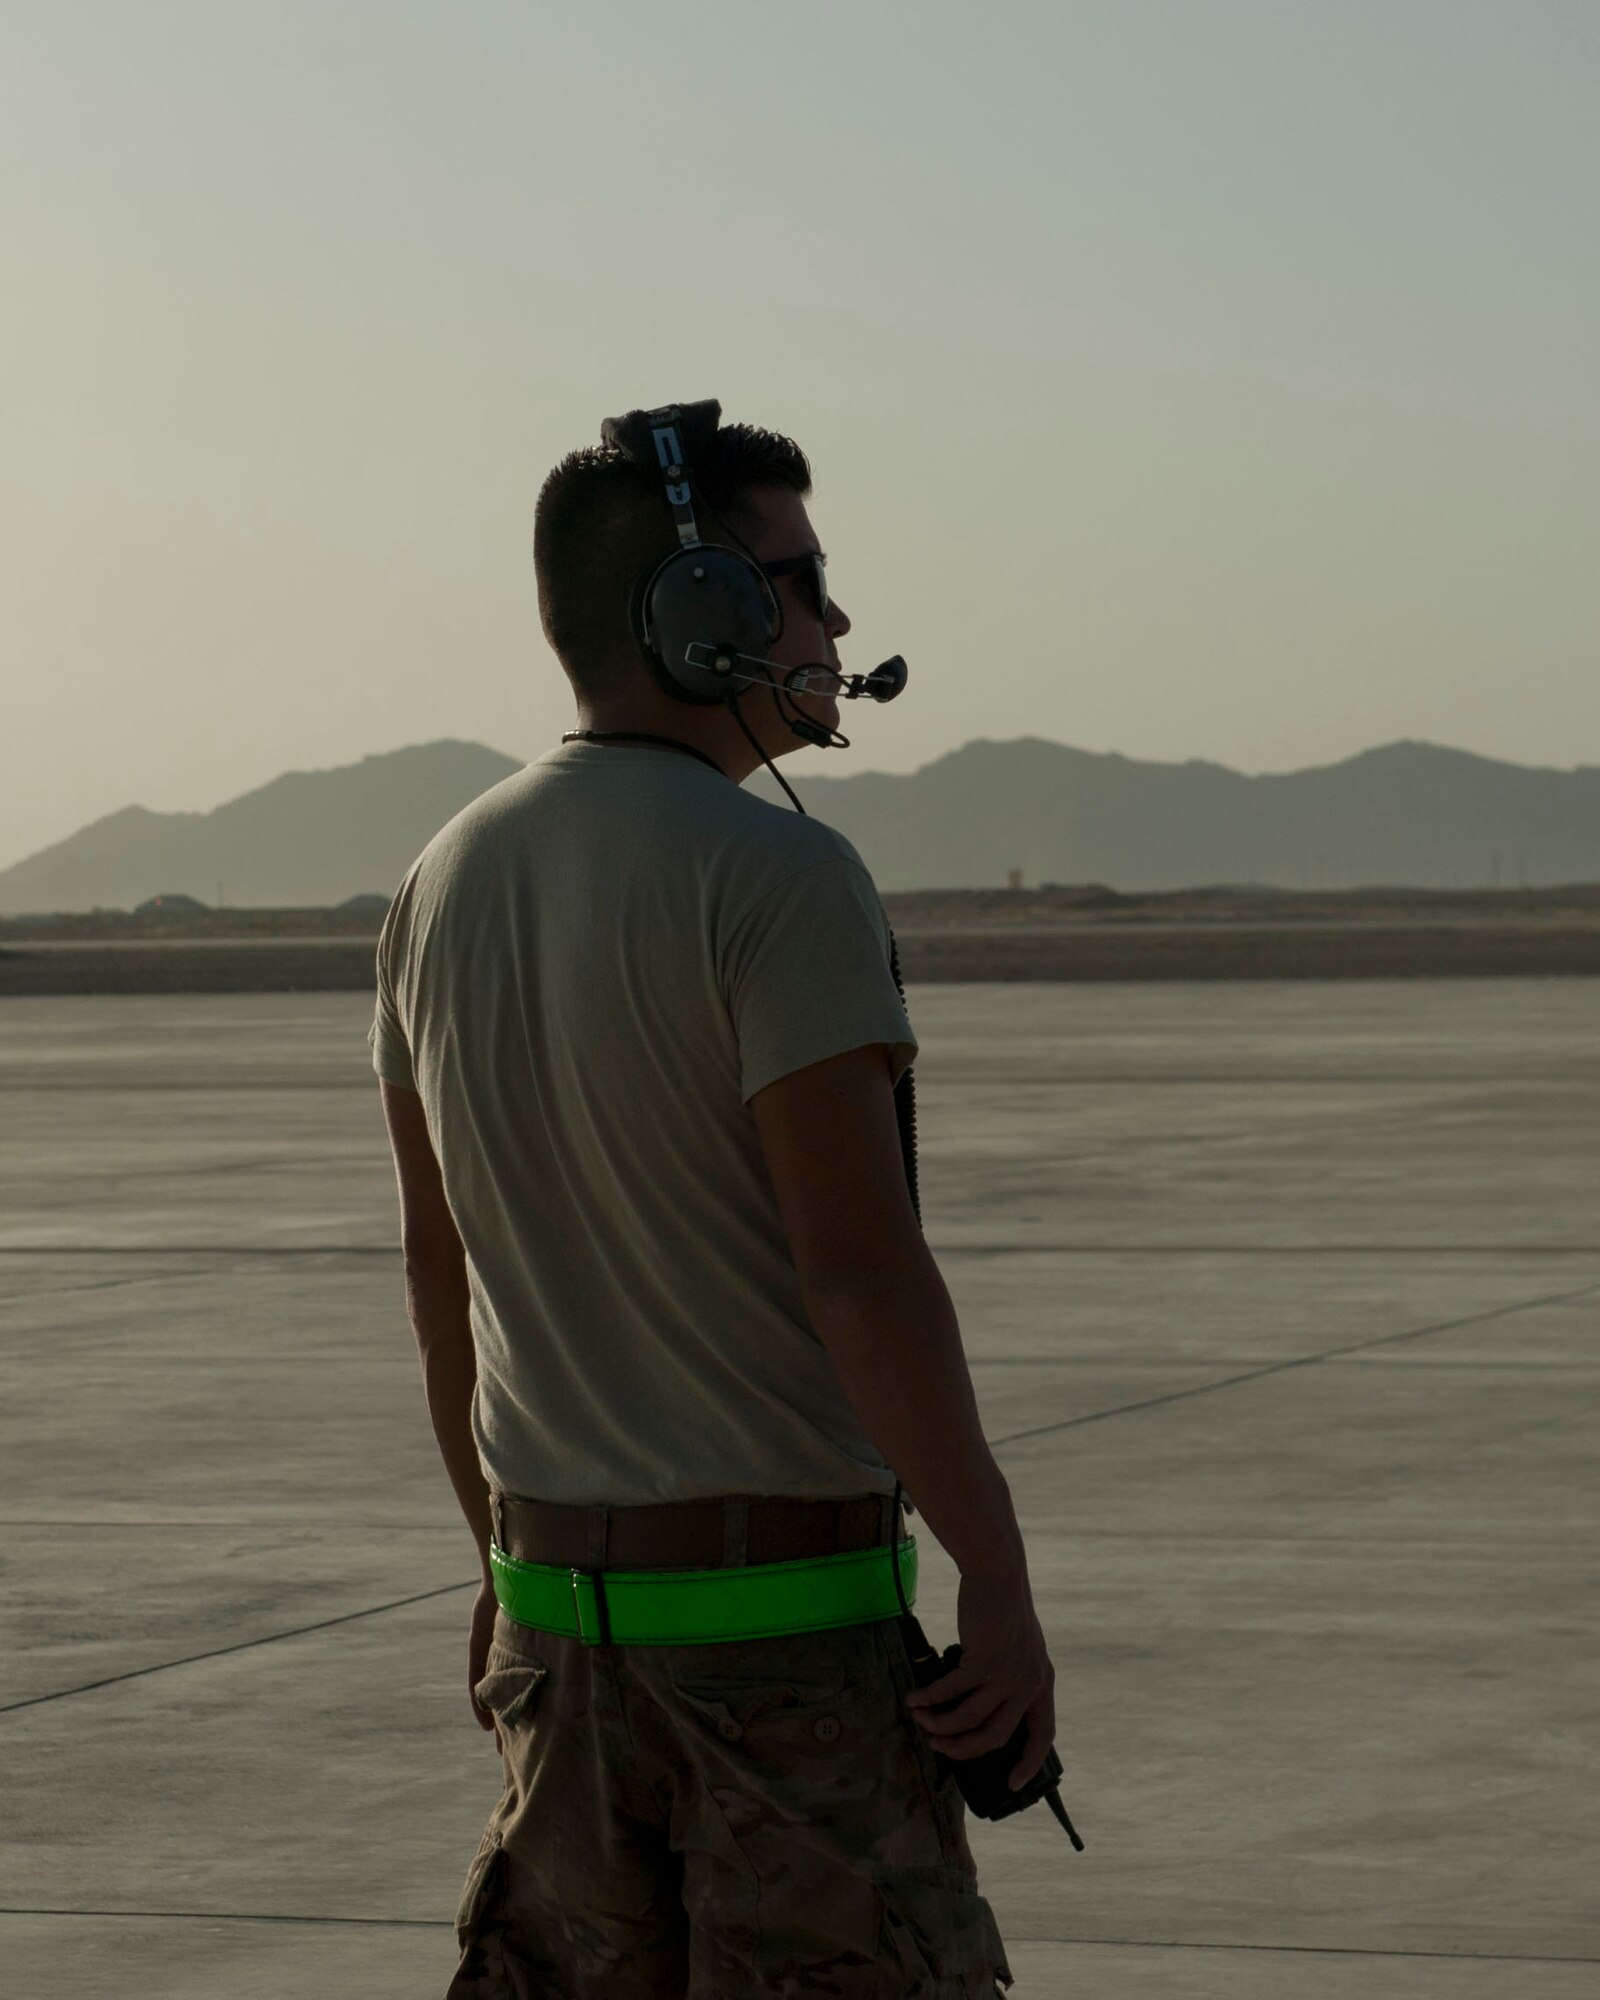 Staff Sgt. Patrick Brennan, 455th Expeditionary Aircraft Maintenance Squadron crew chief, looks towards a C-130J Super Hercules, Kandahar Airfield, Afghanistan, Aug. 19, 2016. Brennan was examining the C-130J as fuel was being uploaded to the aircraft for delivery to another base in Afghanistan. (U.S. Air Force photo by Capt. Korey Fratini)